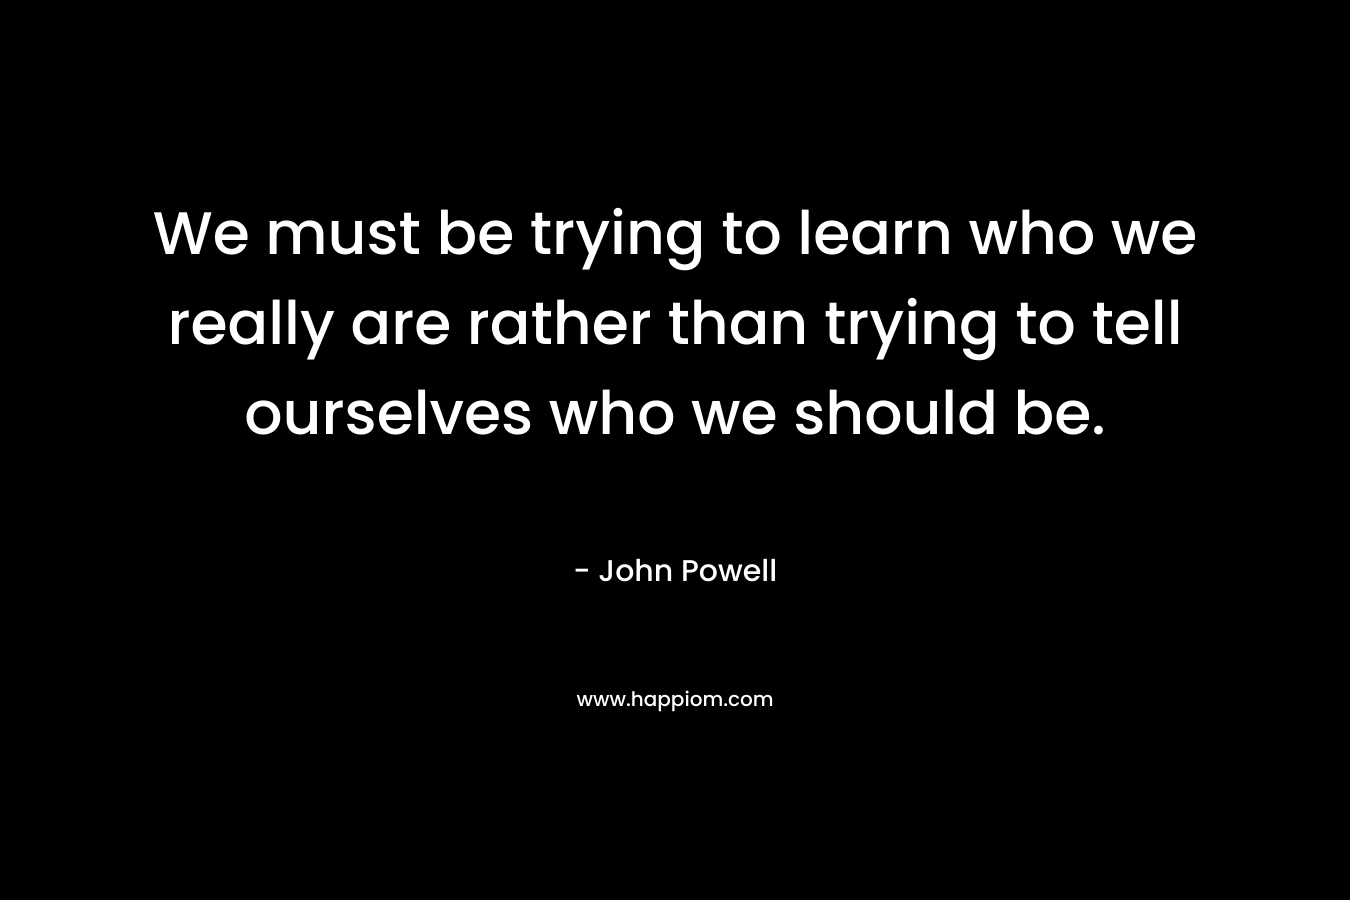 We must be trying to learn who we really are rather than trying to tell ourselves who we should be.